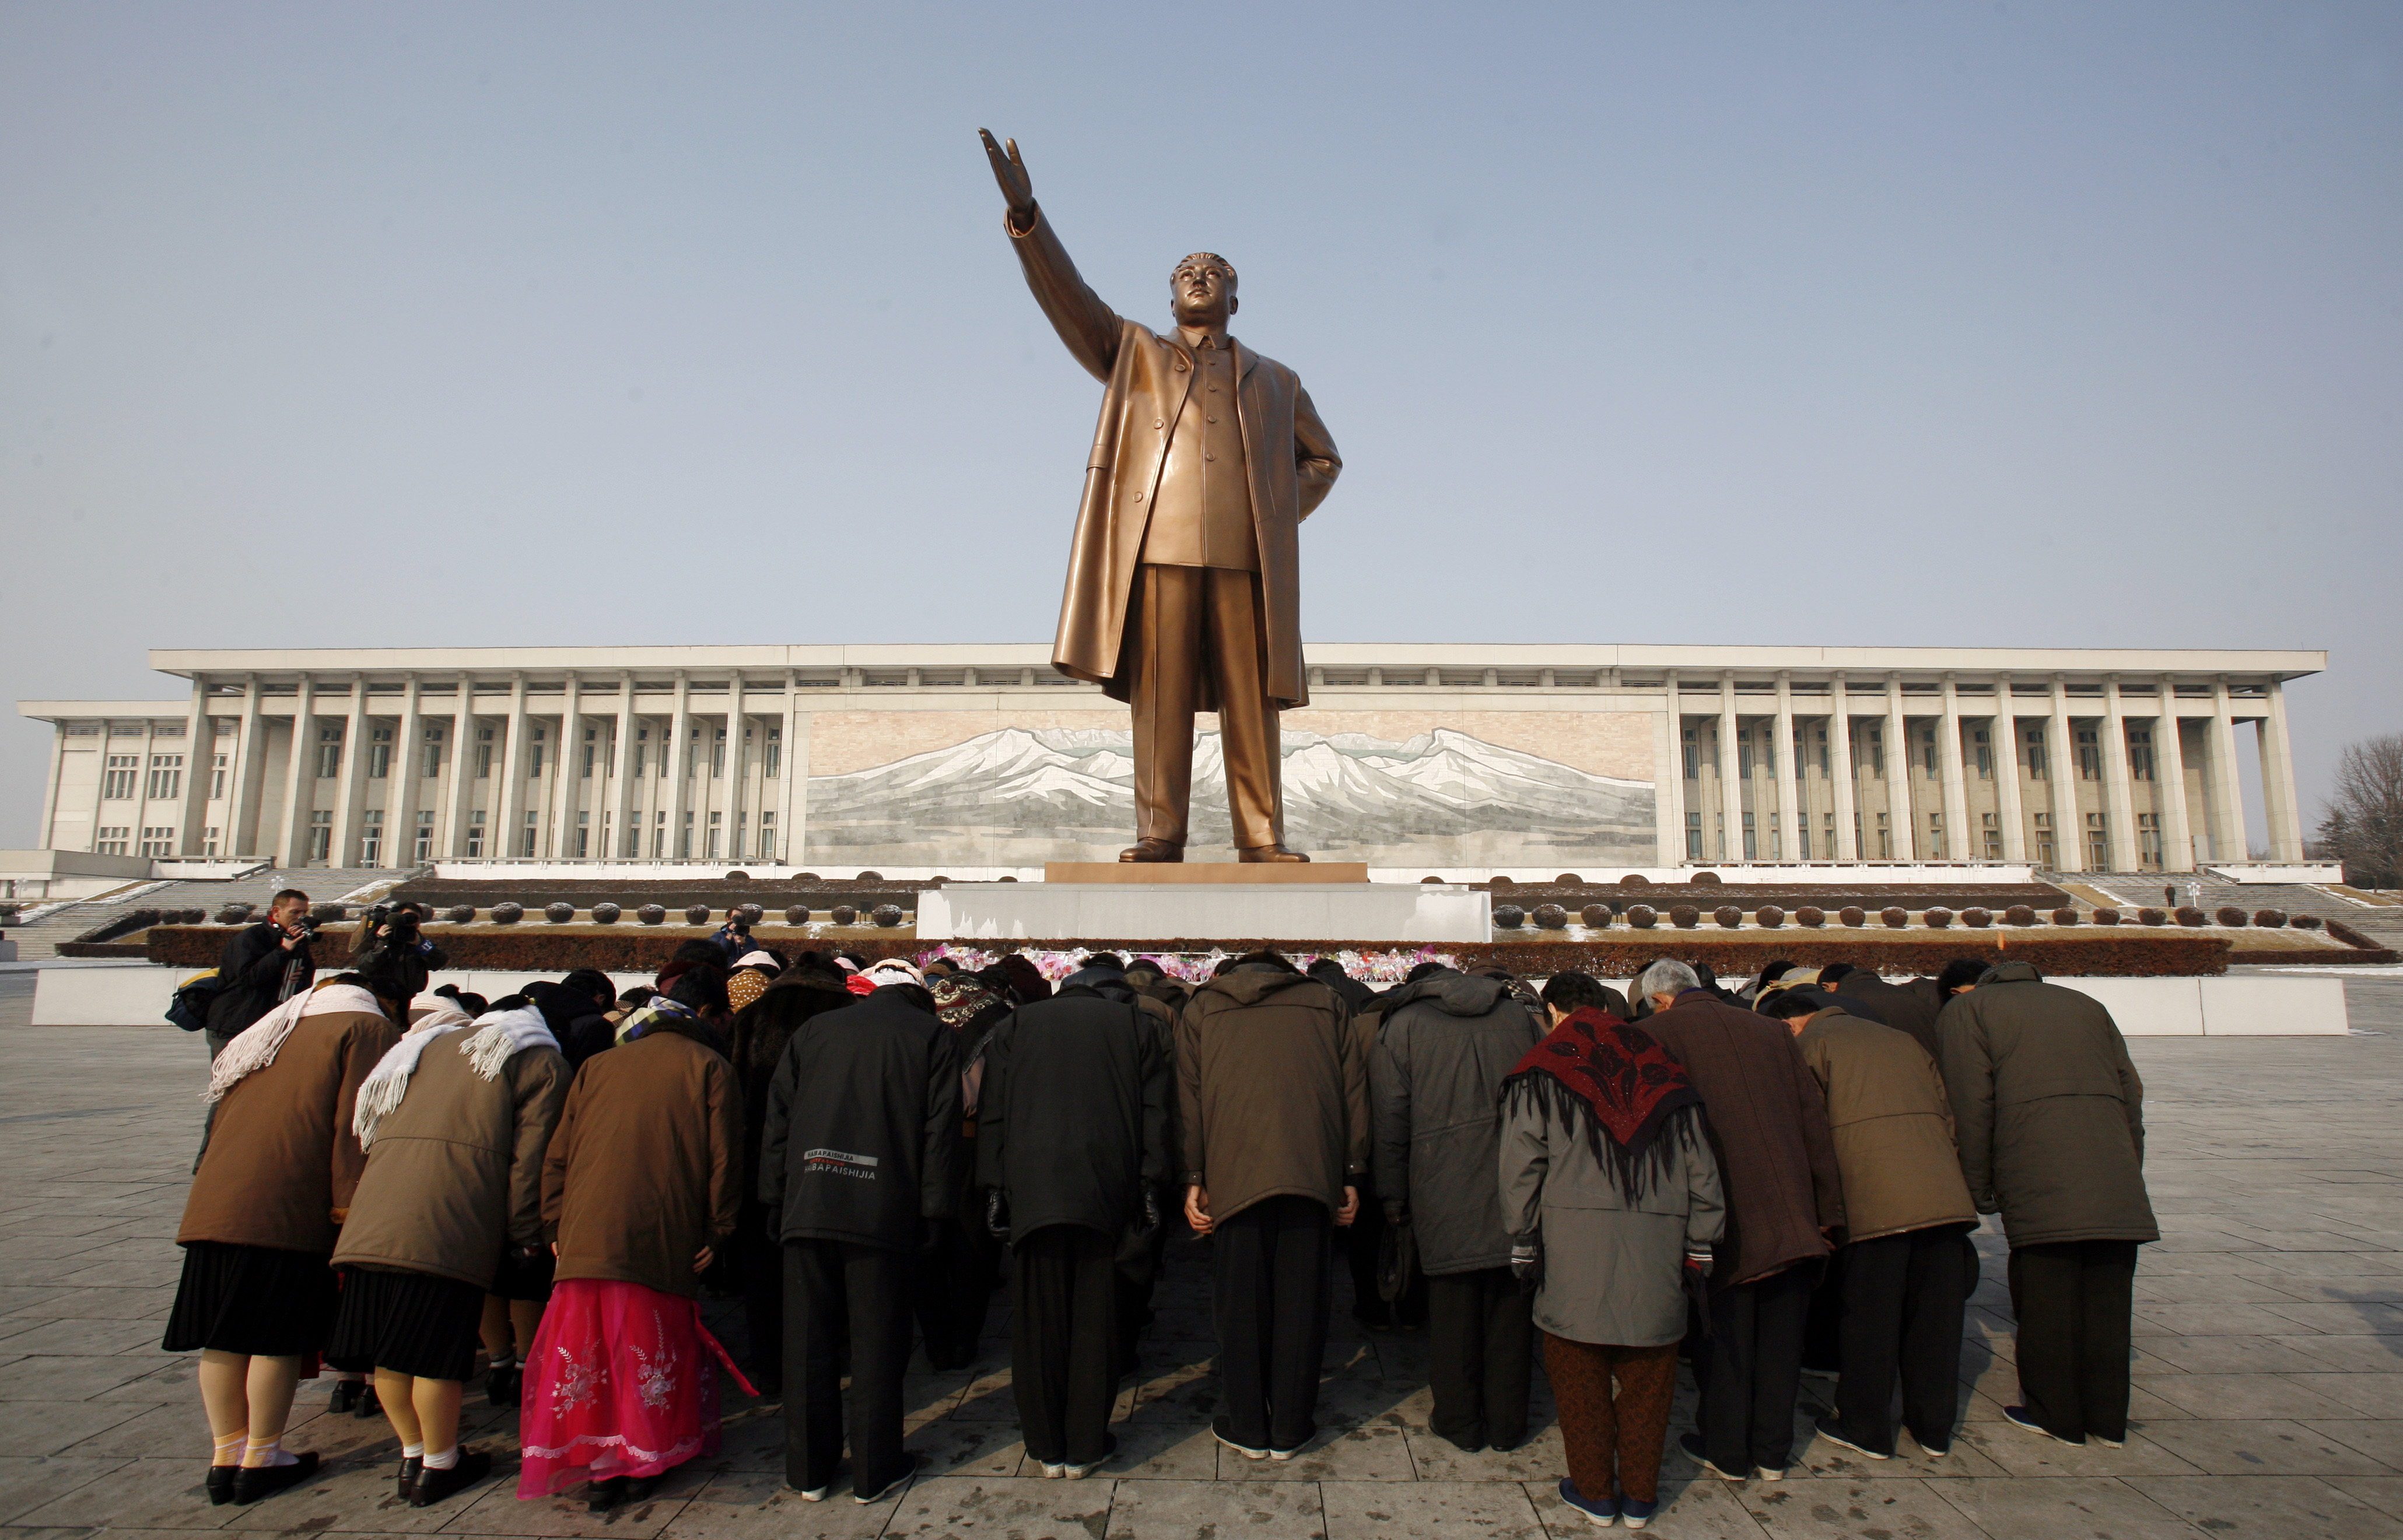 A group of people bow at the base of the giant bronze statue of the state founder and 'Great Leader' Kim-Il Sung in the North Korean capital of Pyongyang February 26, 2008.       REUTERS/David Gray/Files